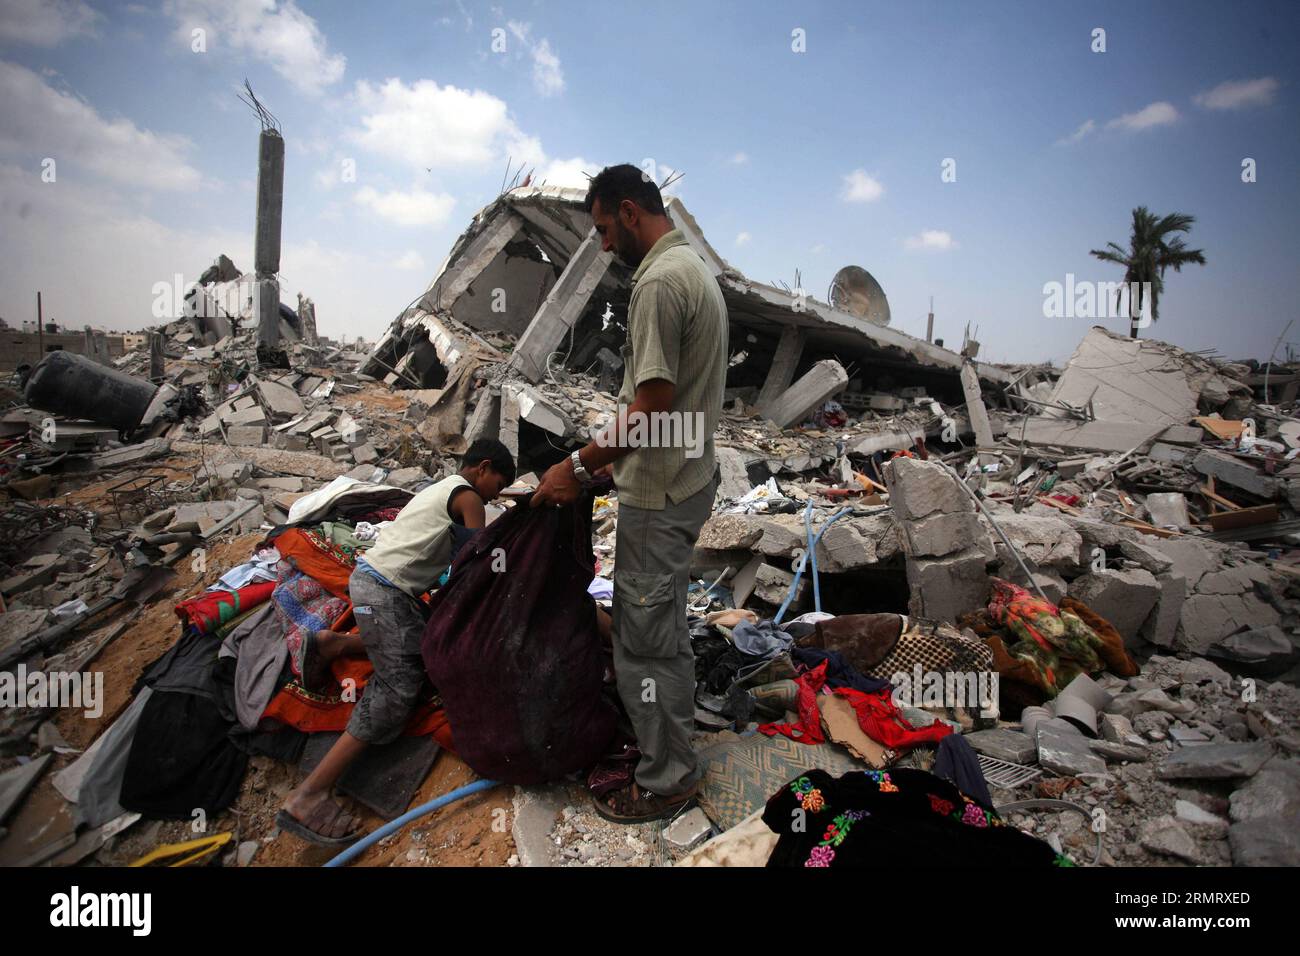 (140805) -- GAZA, Aug. 5, 2014 -- Palestinians collect belongings from their destroyed house after it was hit by an Israeli strike, in Khuzaa village, east of Khan Younis, in the southern Gaza Strip, on Aug. 5, 2014. A 72-hour ceasefire in the Gaza Strip brokered by Egypt came into effect at 8:00 a.m. local time (0500 GMT) on Tuesday, marking the latest attempt to stop the Israeli-Palestinian clashes after previous efforts ended in failure. ) MIDEAST-GAZA-CEASEFIRE YasserxQudih PUBLICATIONxNOTxINxCHN   Gaza Aug 5 2014 PALESTINIANS Collect belonging from their destroyed House After IT what Hit Stock Photo